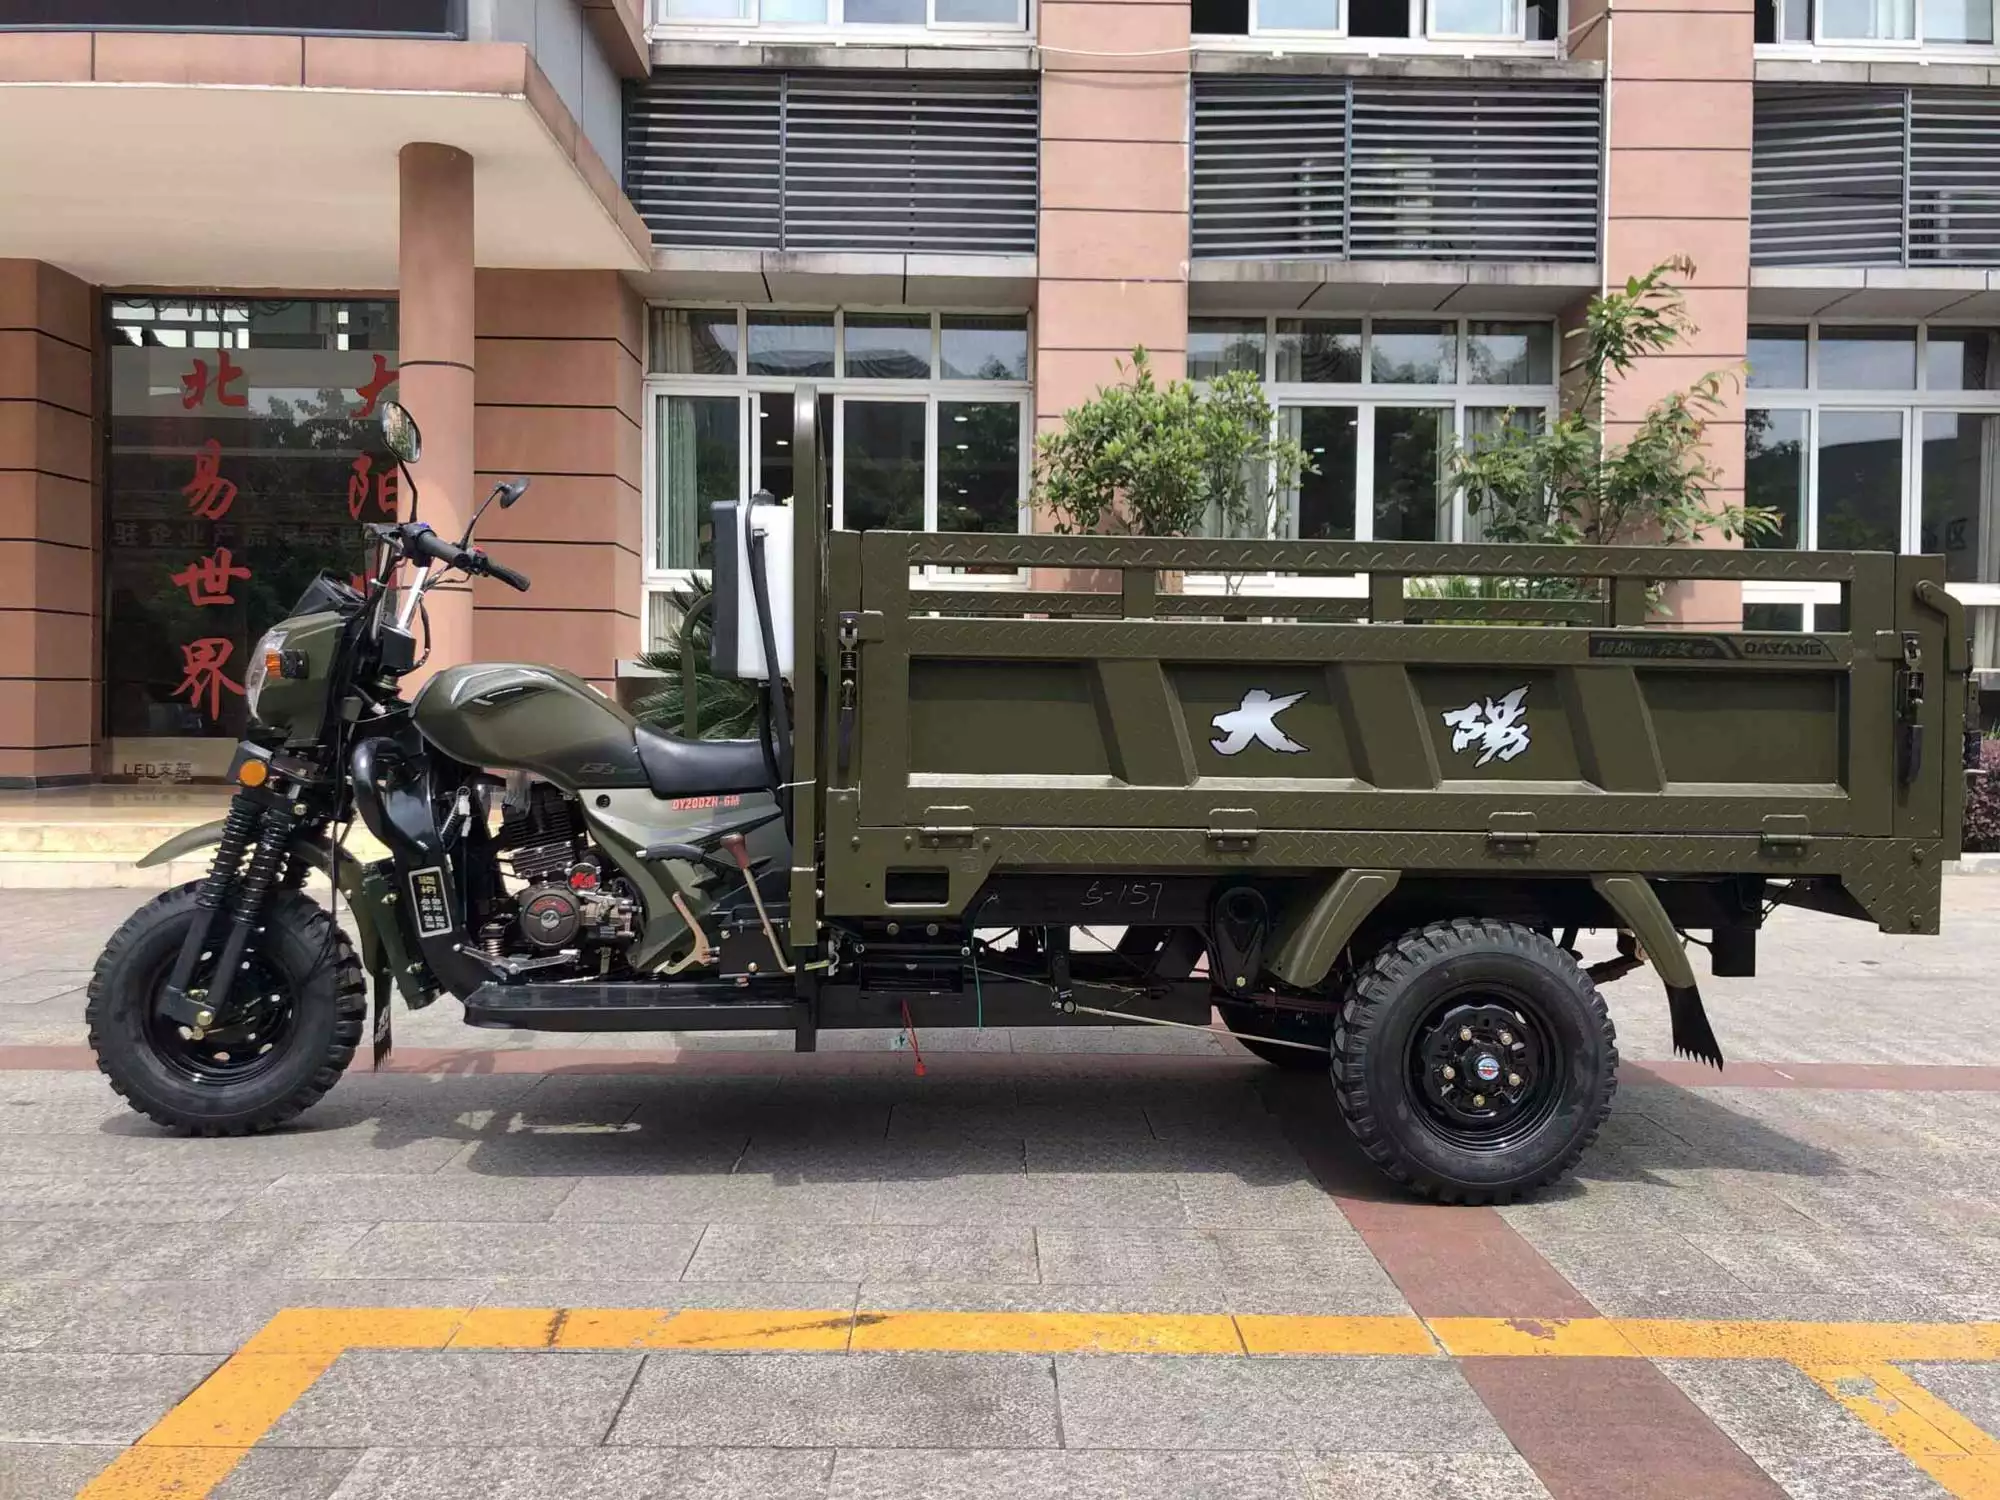 Motorcycle manufacturers cargo tricycle ghana cargo delivery van 200cc moto cargo tricycle price